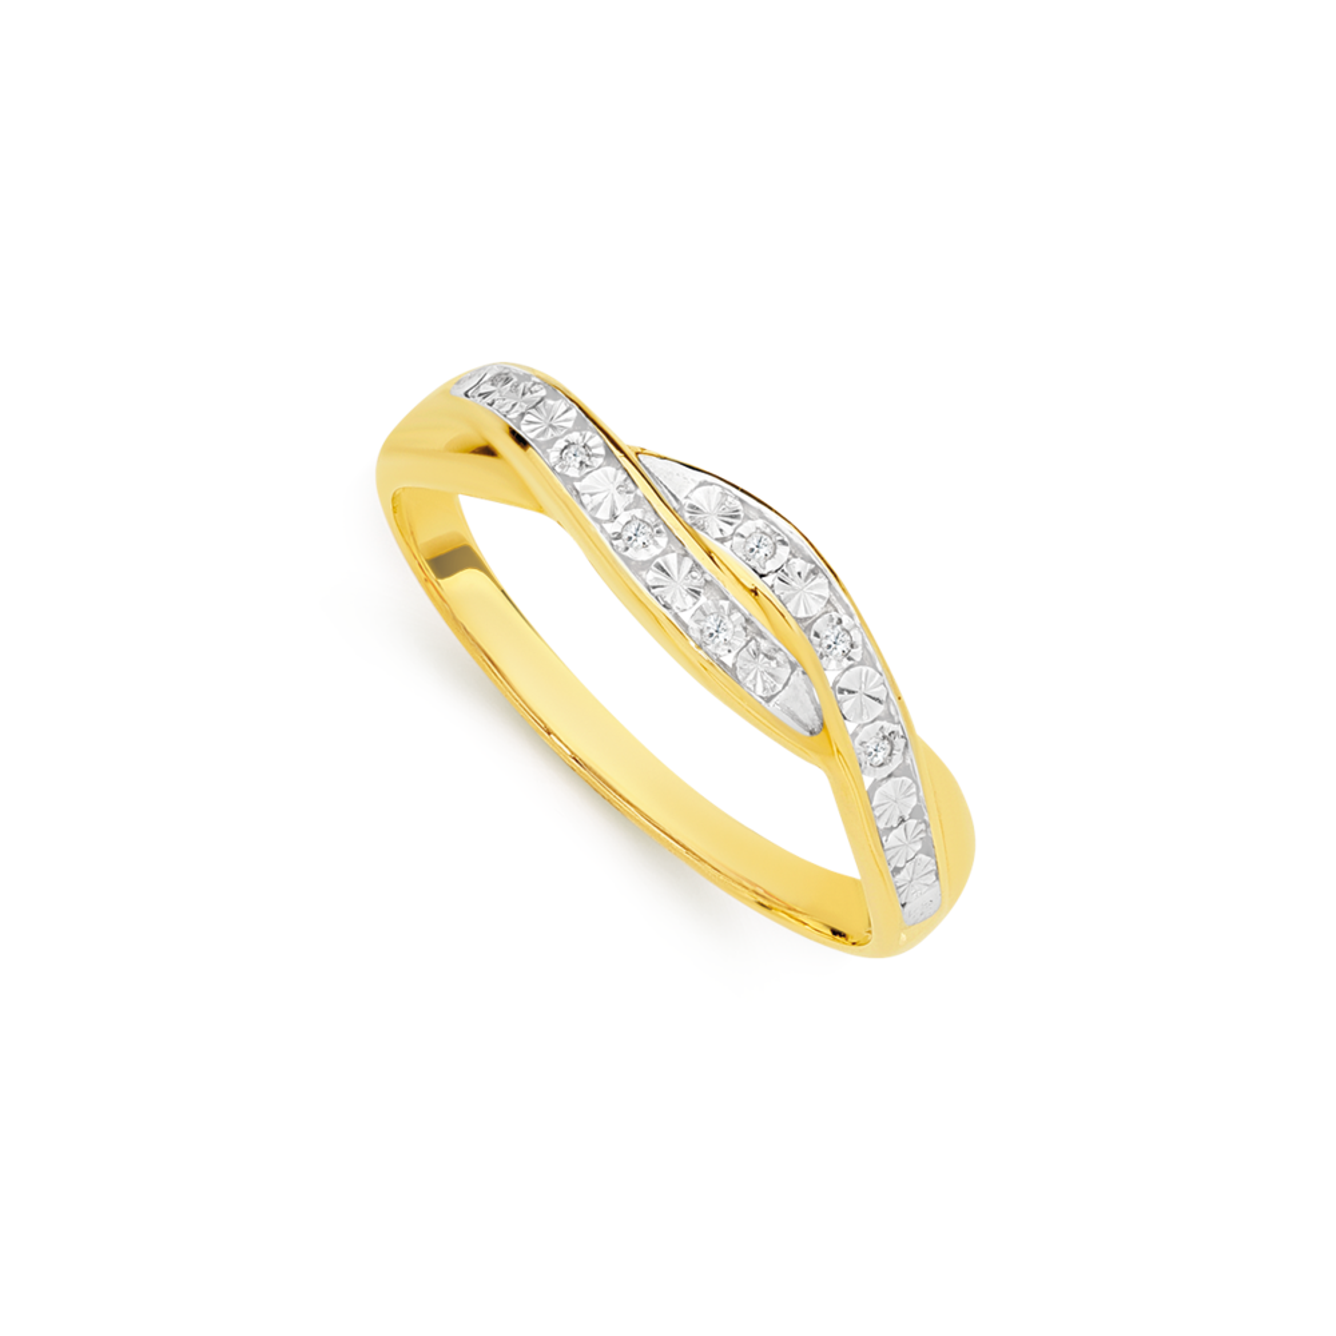 Rings | Pascoes The Jewellers